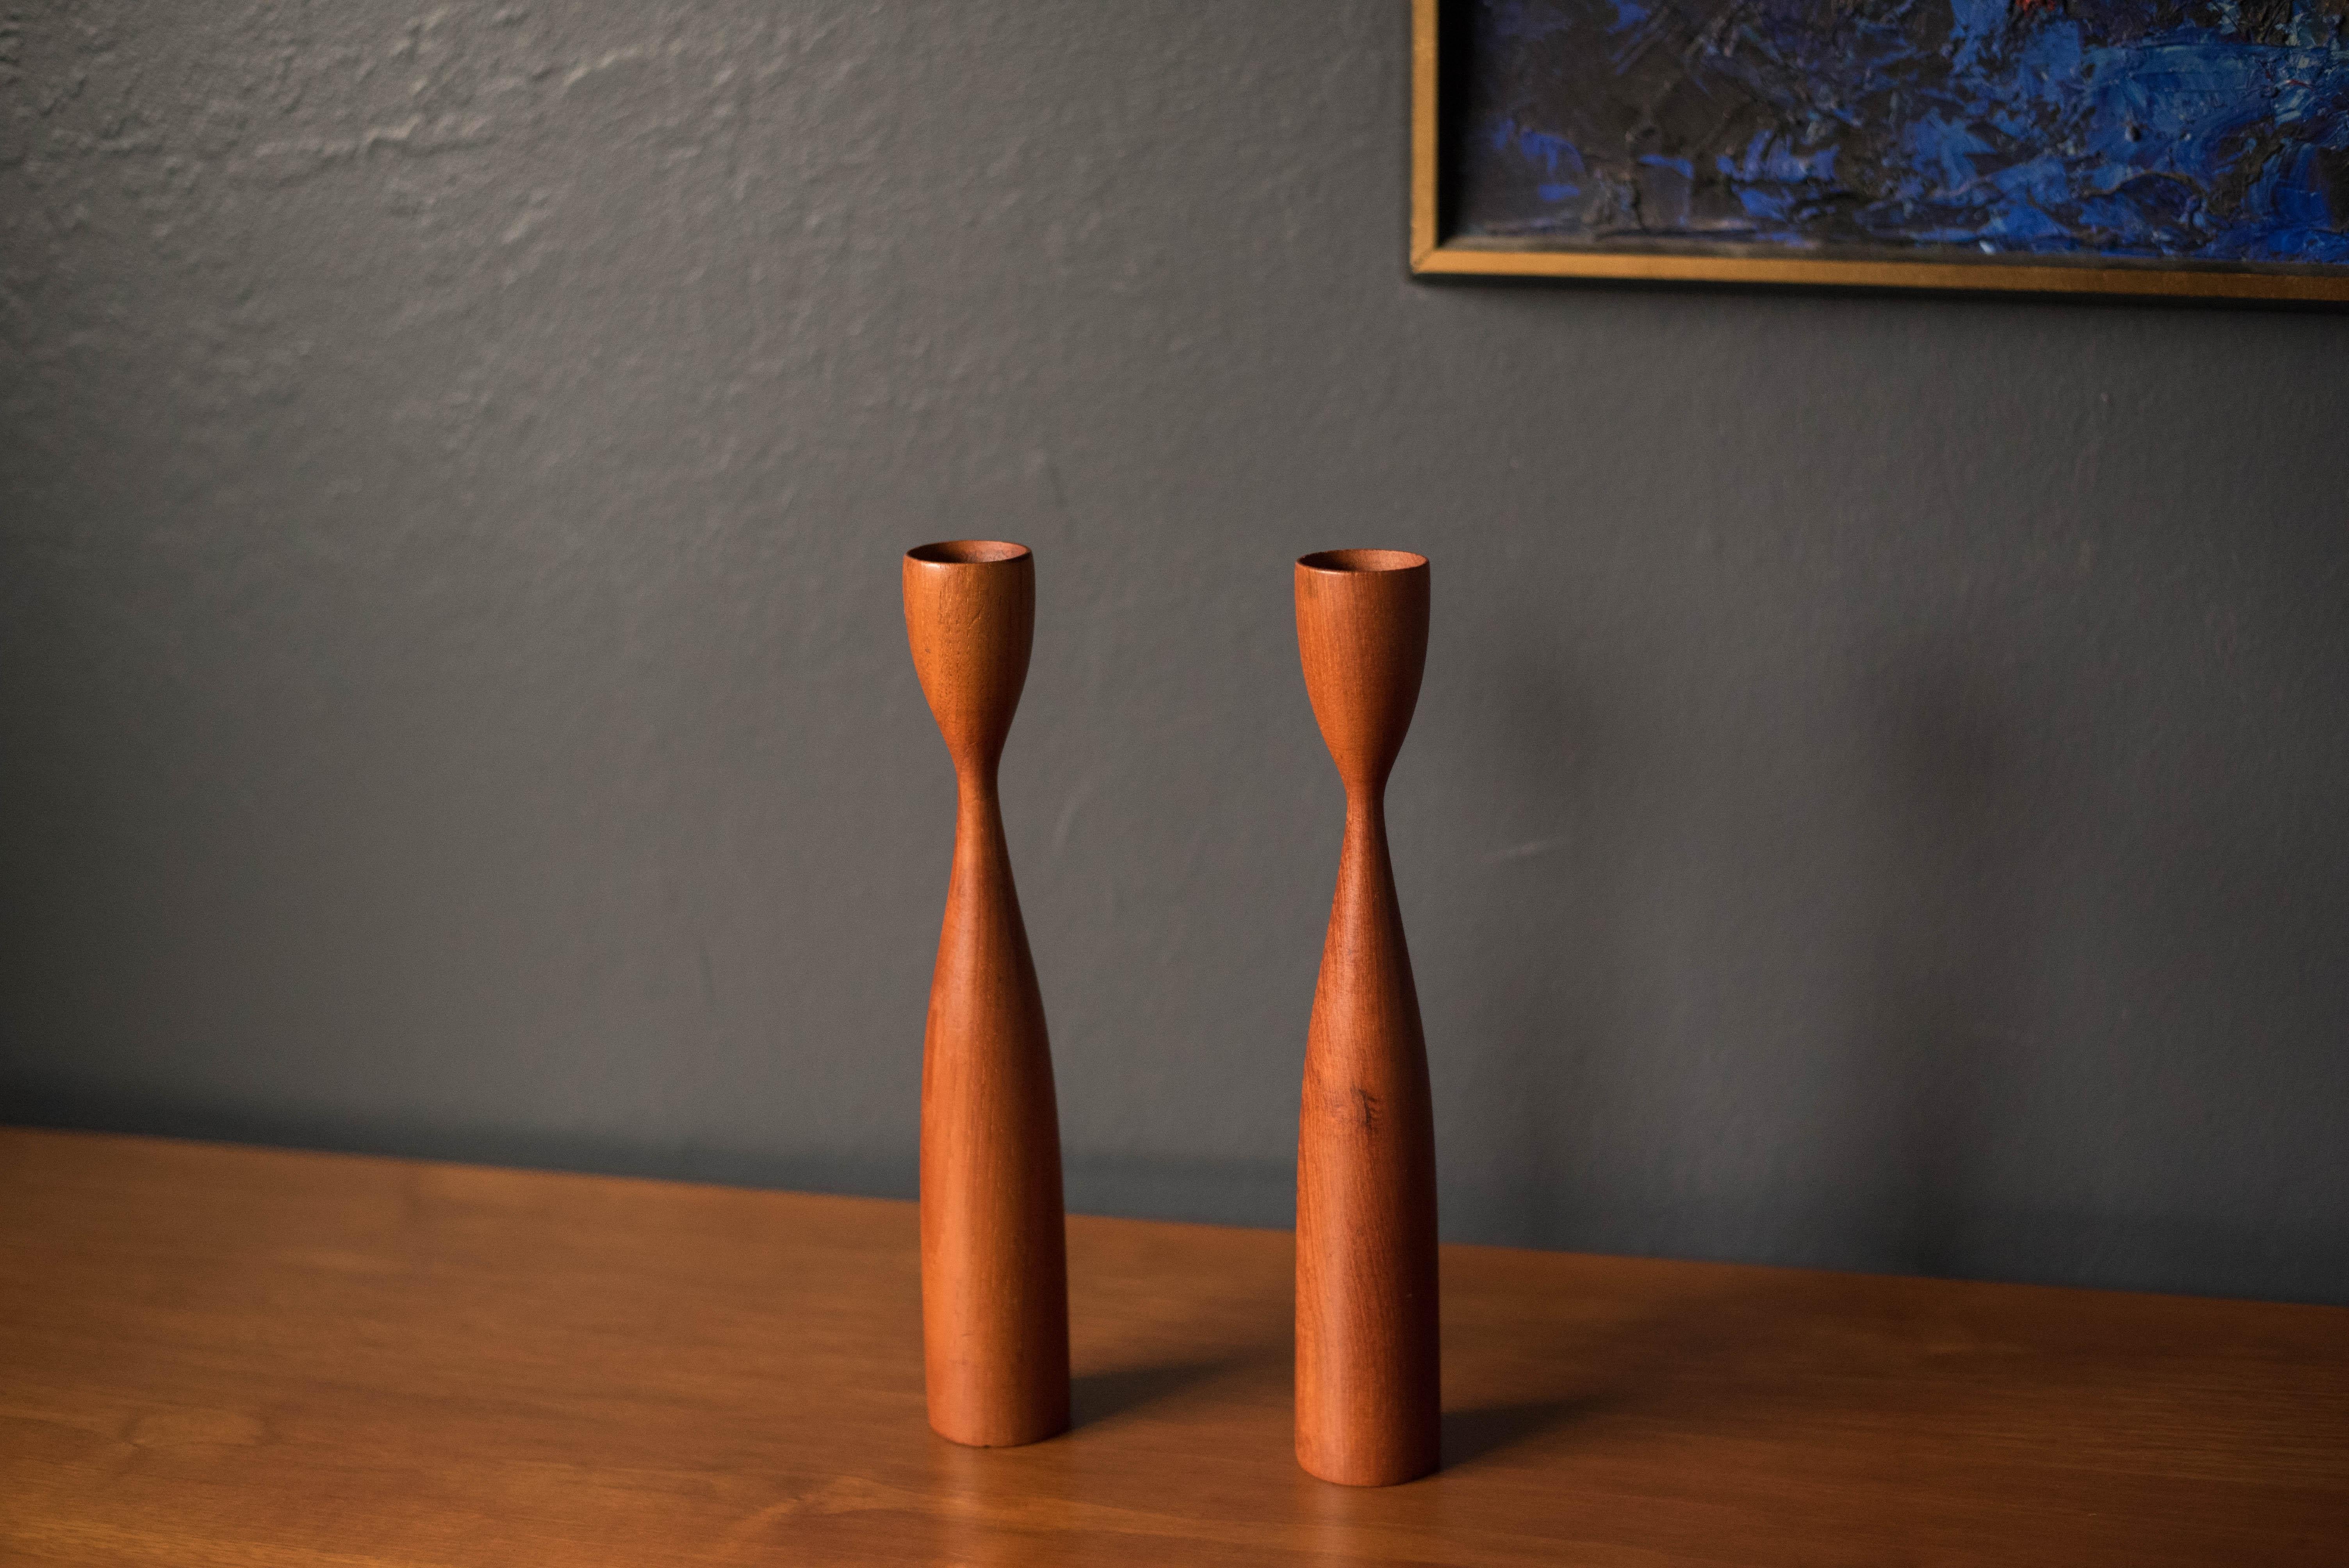 Vintage pair of teak candle holders made in Denmark. This set displays well with any modern decor and fits 3/4